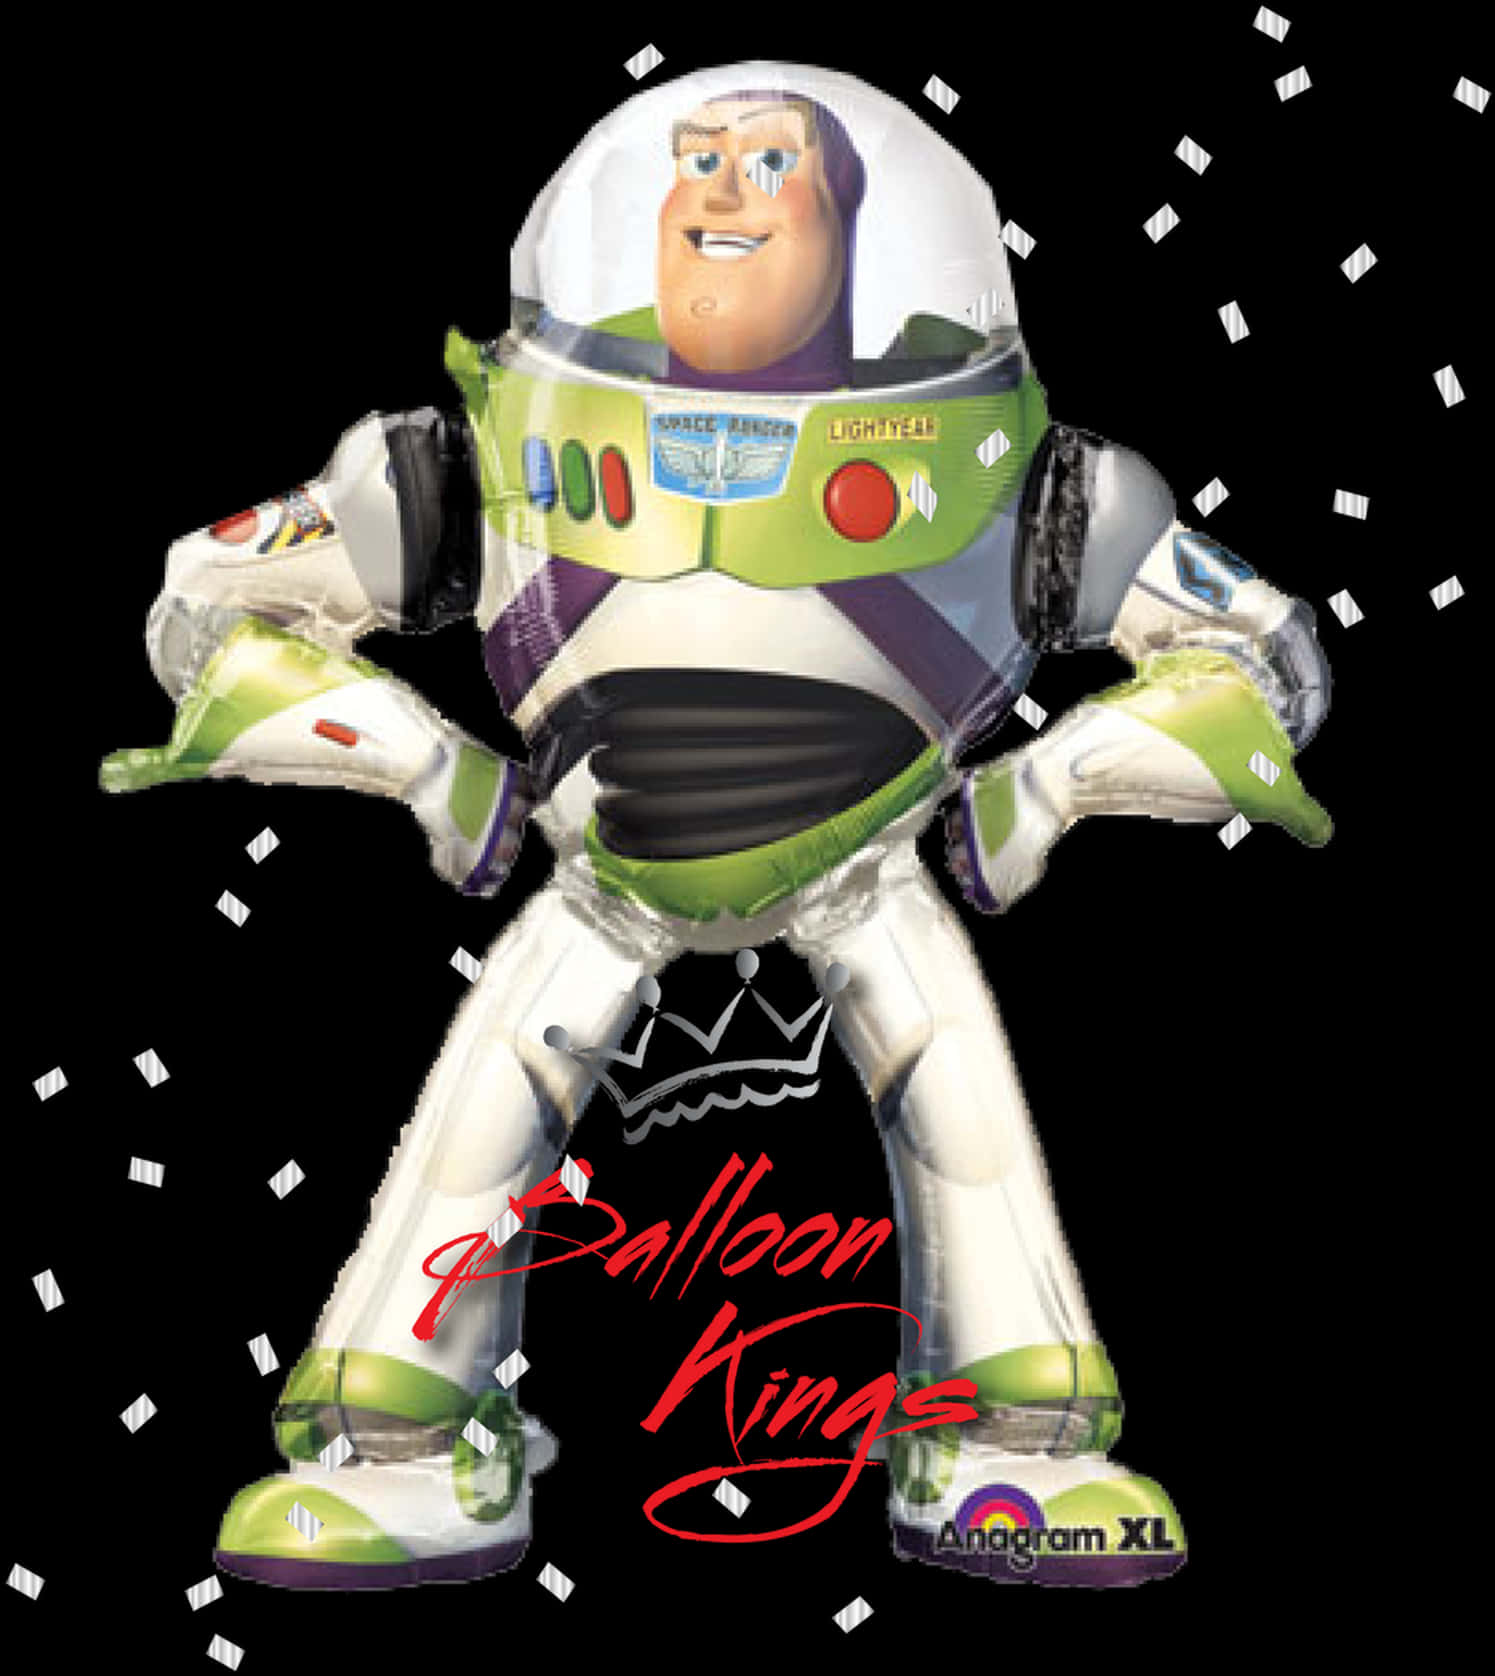 Buzz Lightyear Balloon Product PNG image